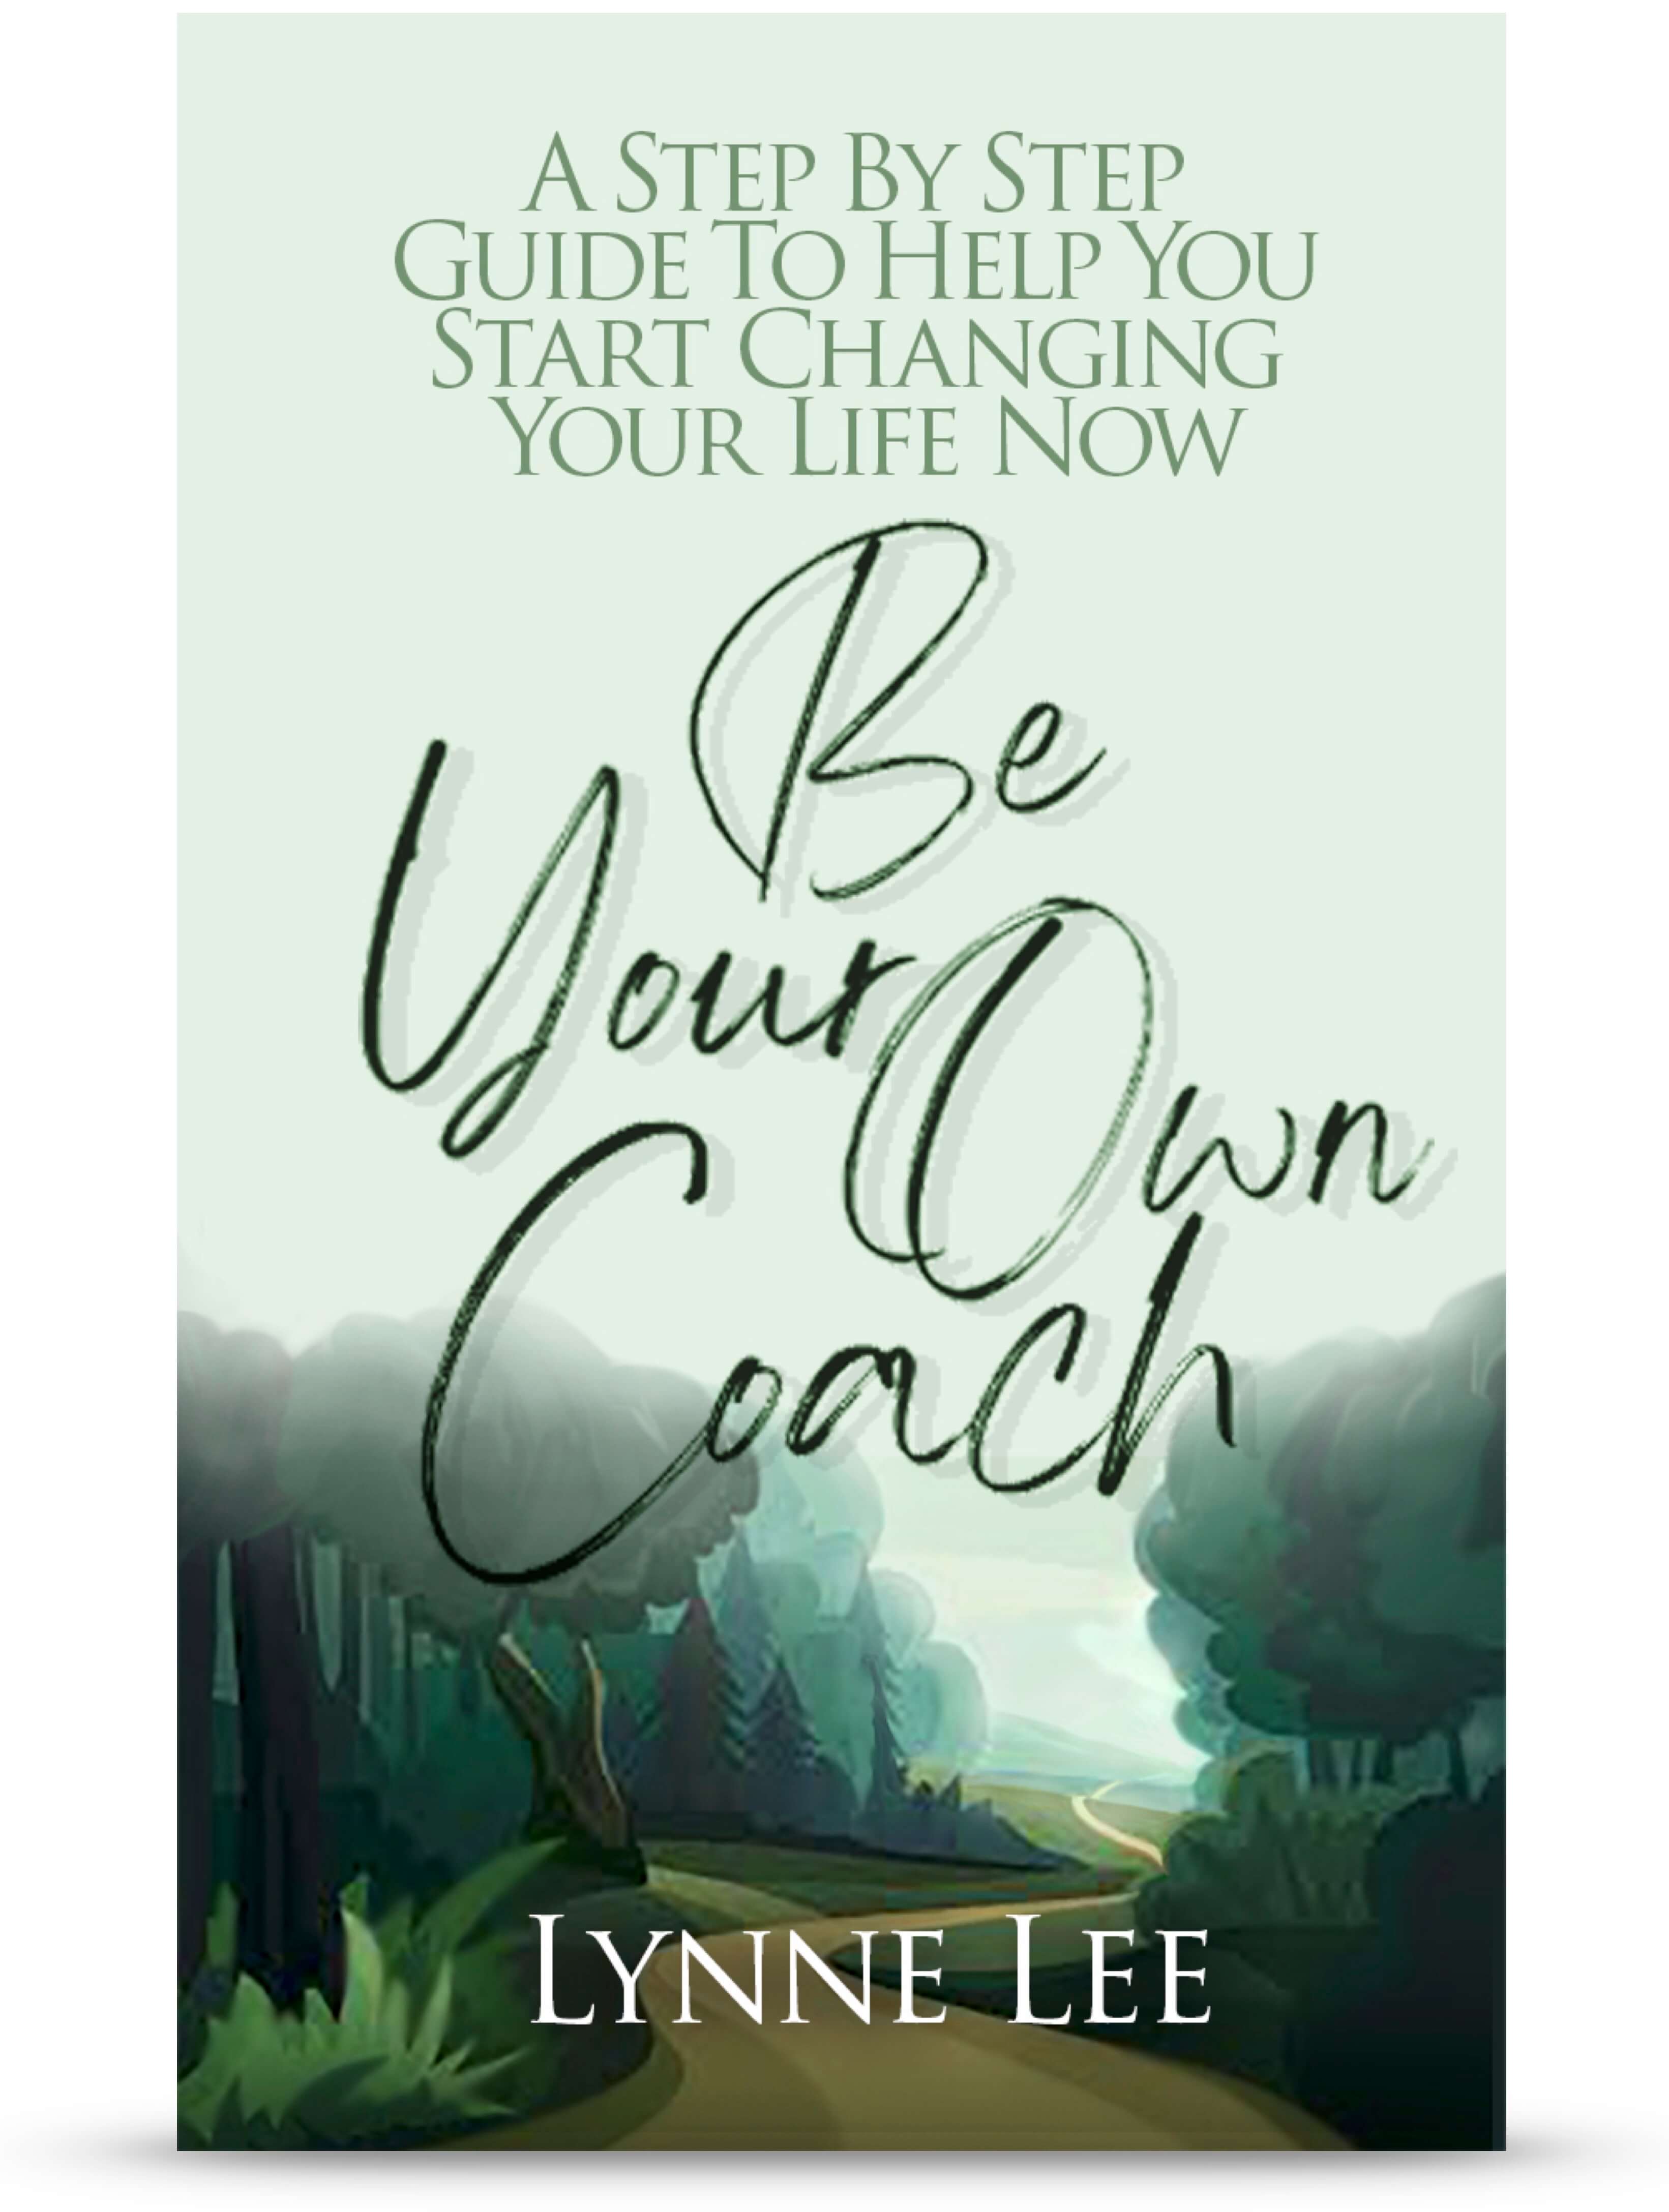 Be Your Own Life Coach free step-by-step coaching guide